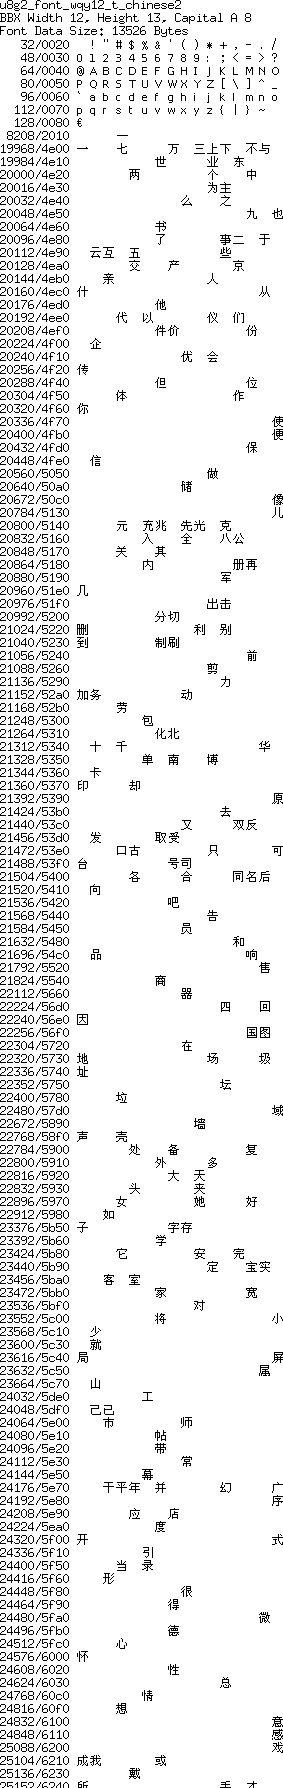 fntpic/u8g2_font_wqy12_t_chinese2.png